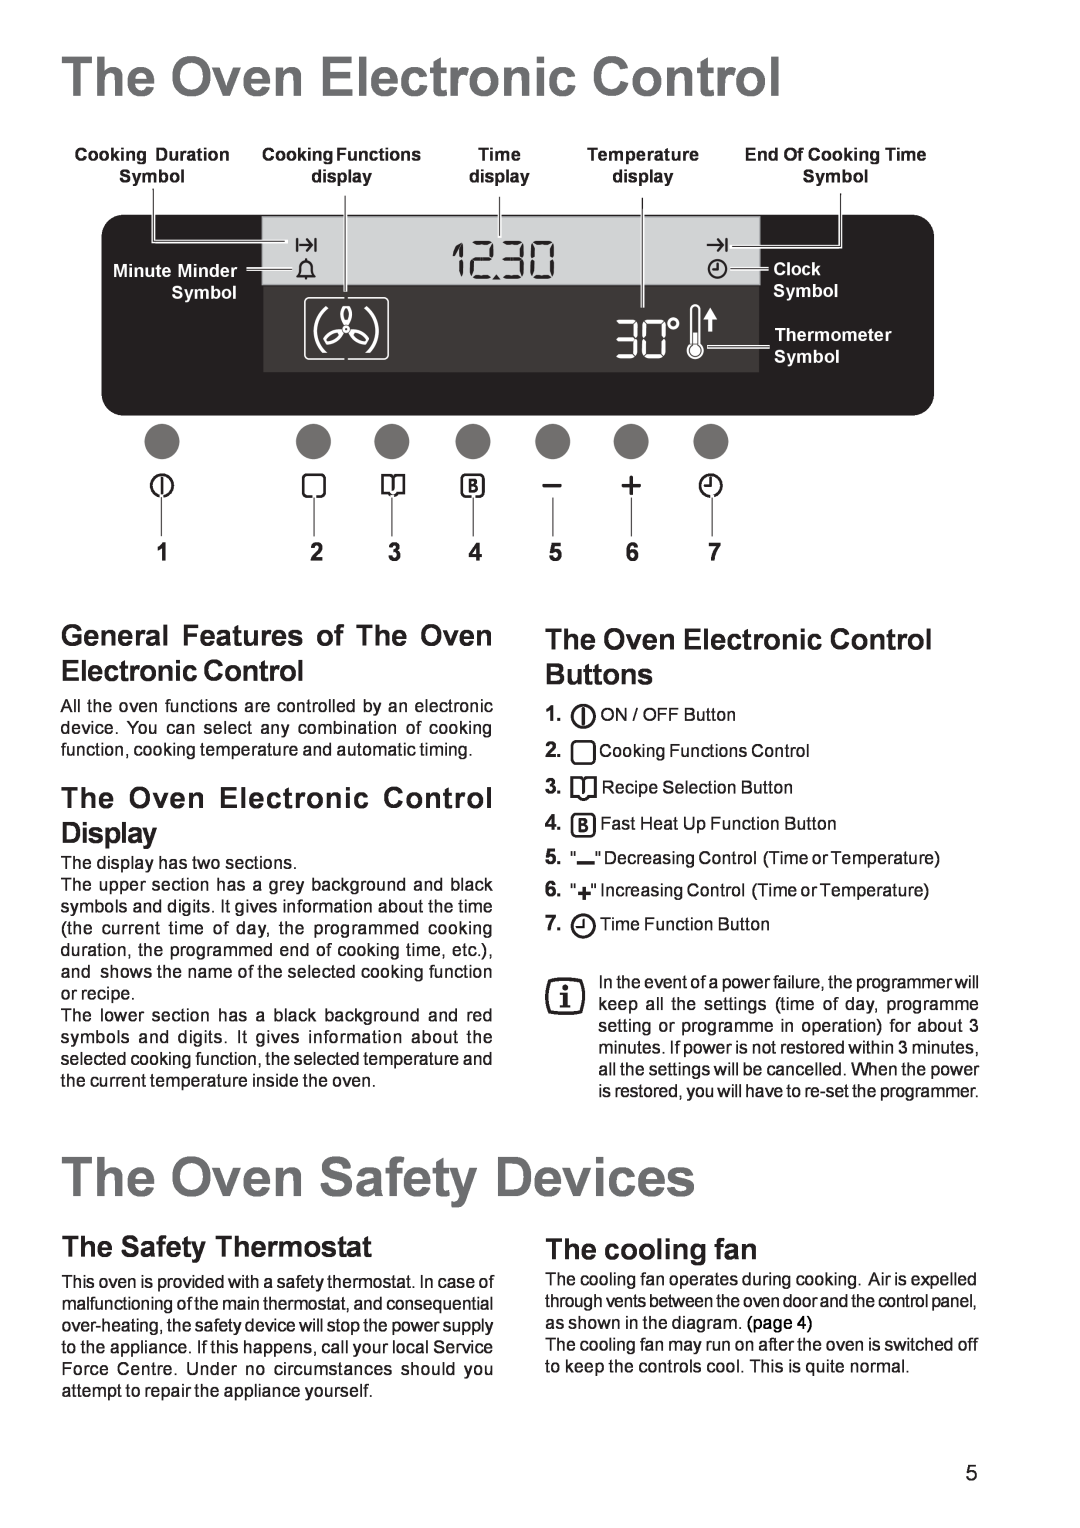 Zanussi ZBS 1063 The Oven Safety Devices, General Features of The Oven Electronic Control, The Safety Thermostat, Time 